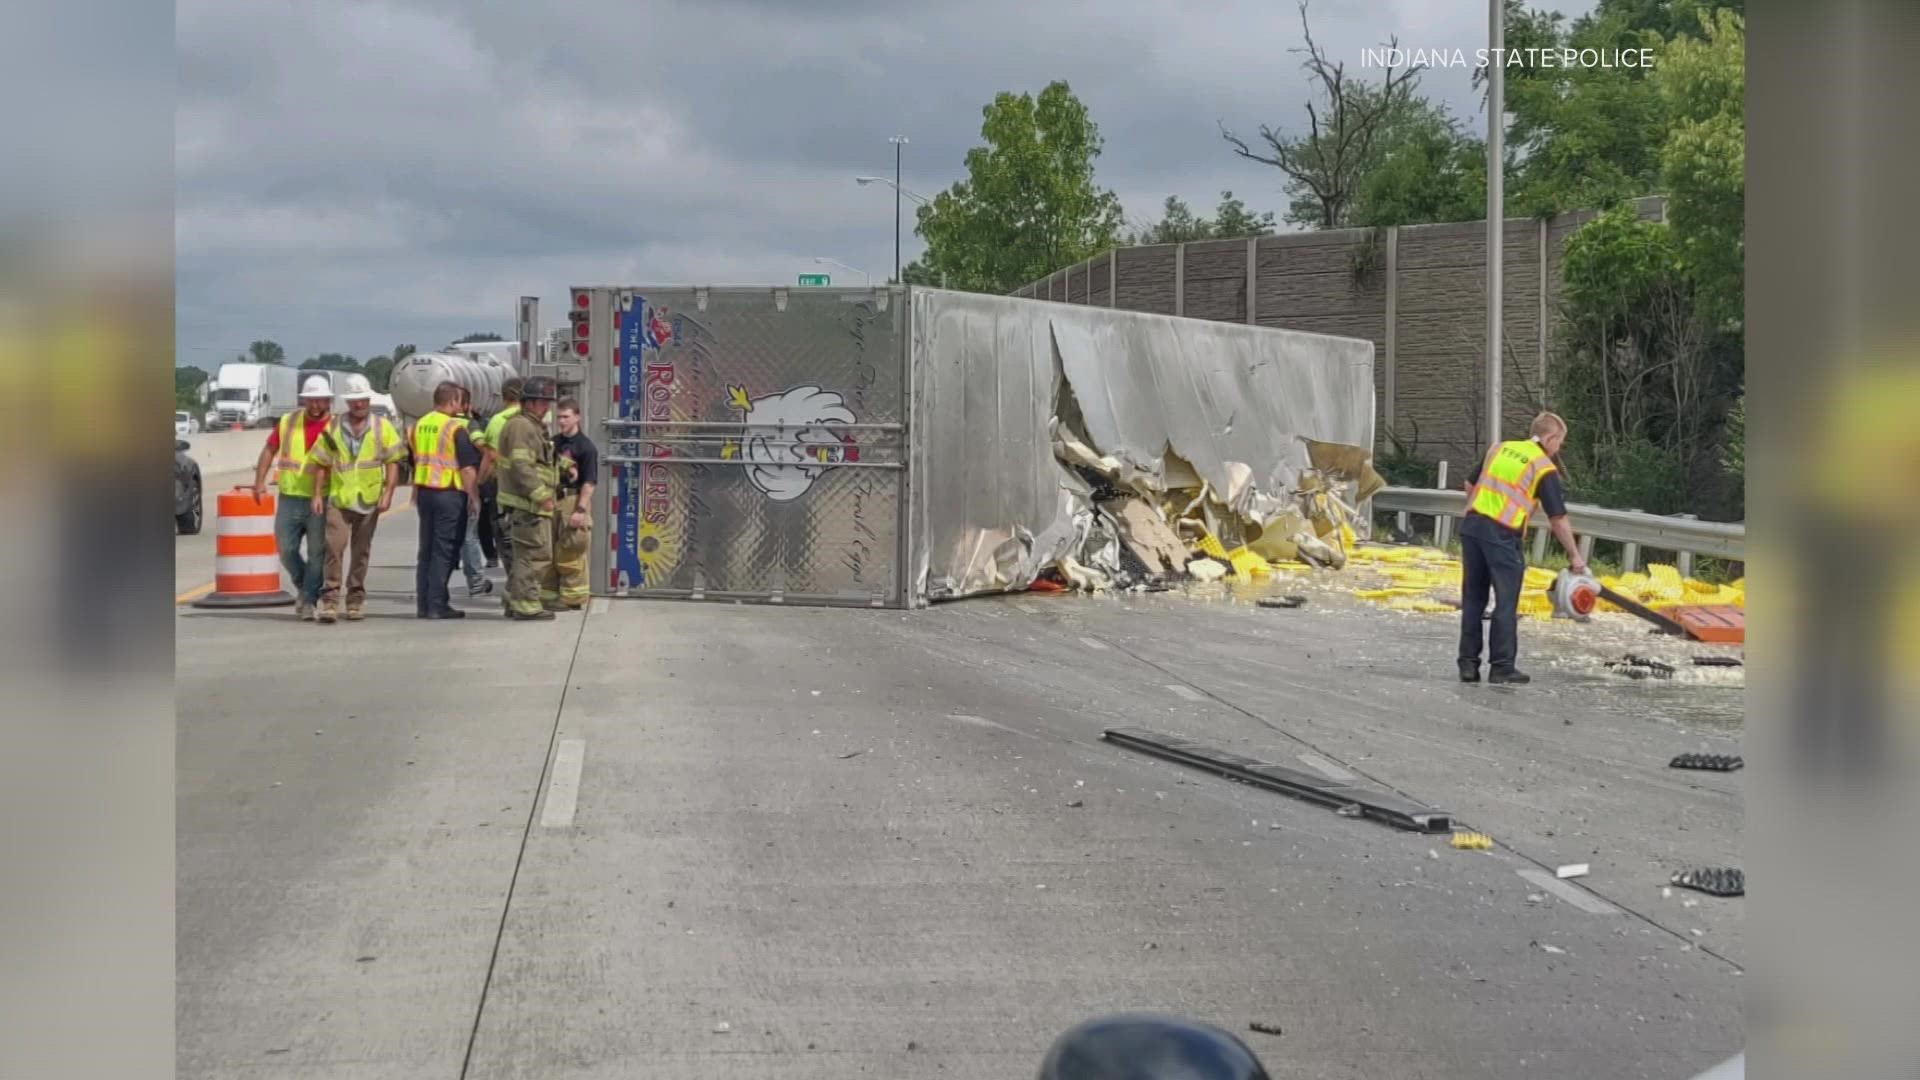 Authorities said the Rose Acres Farms semi-truck overturned on I-65 in Clark County, spilling eggs all over the interstate.